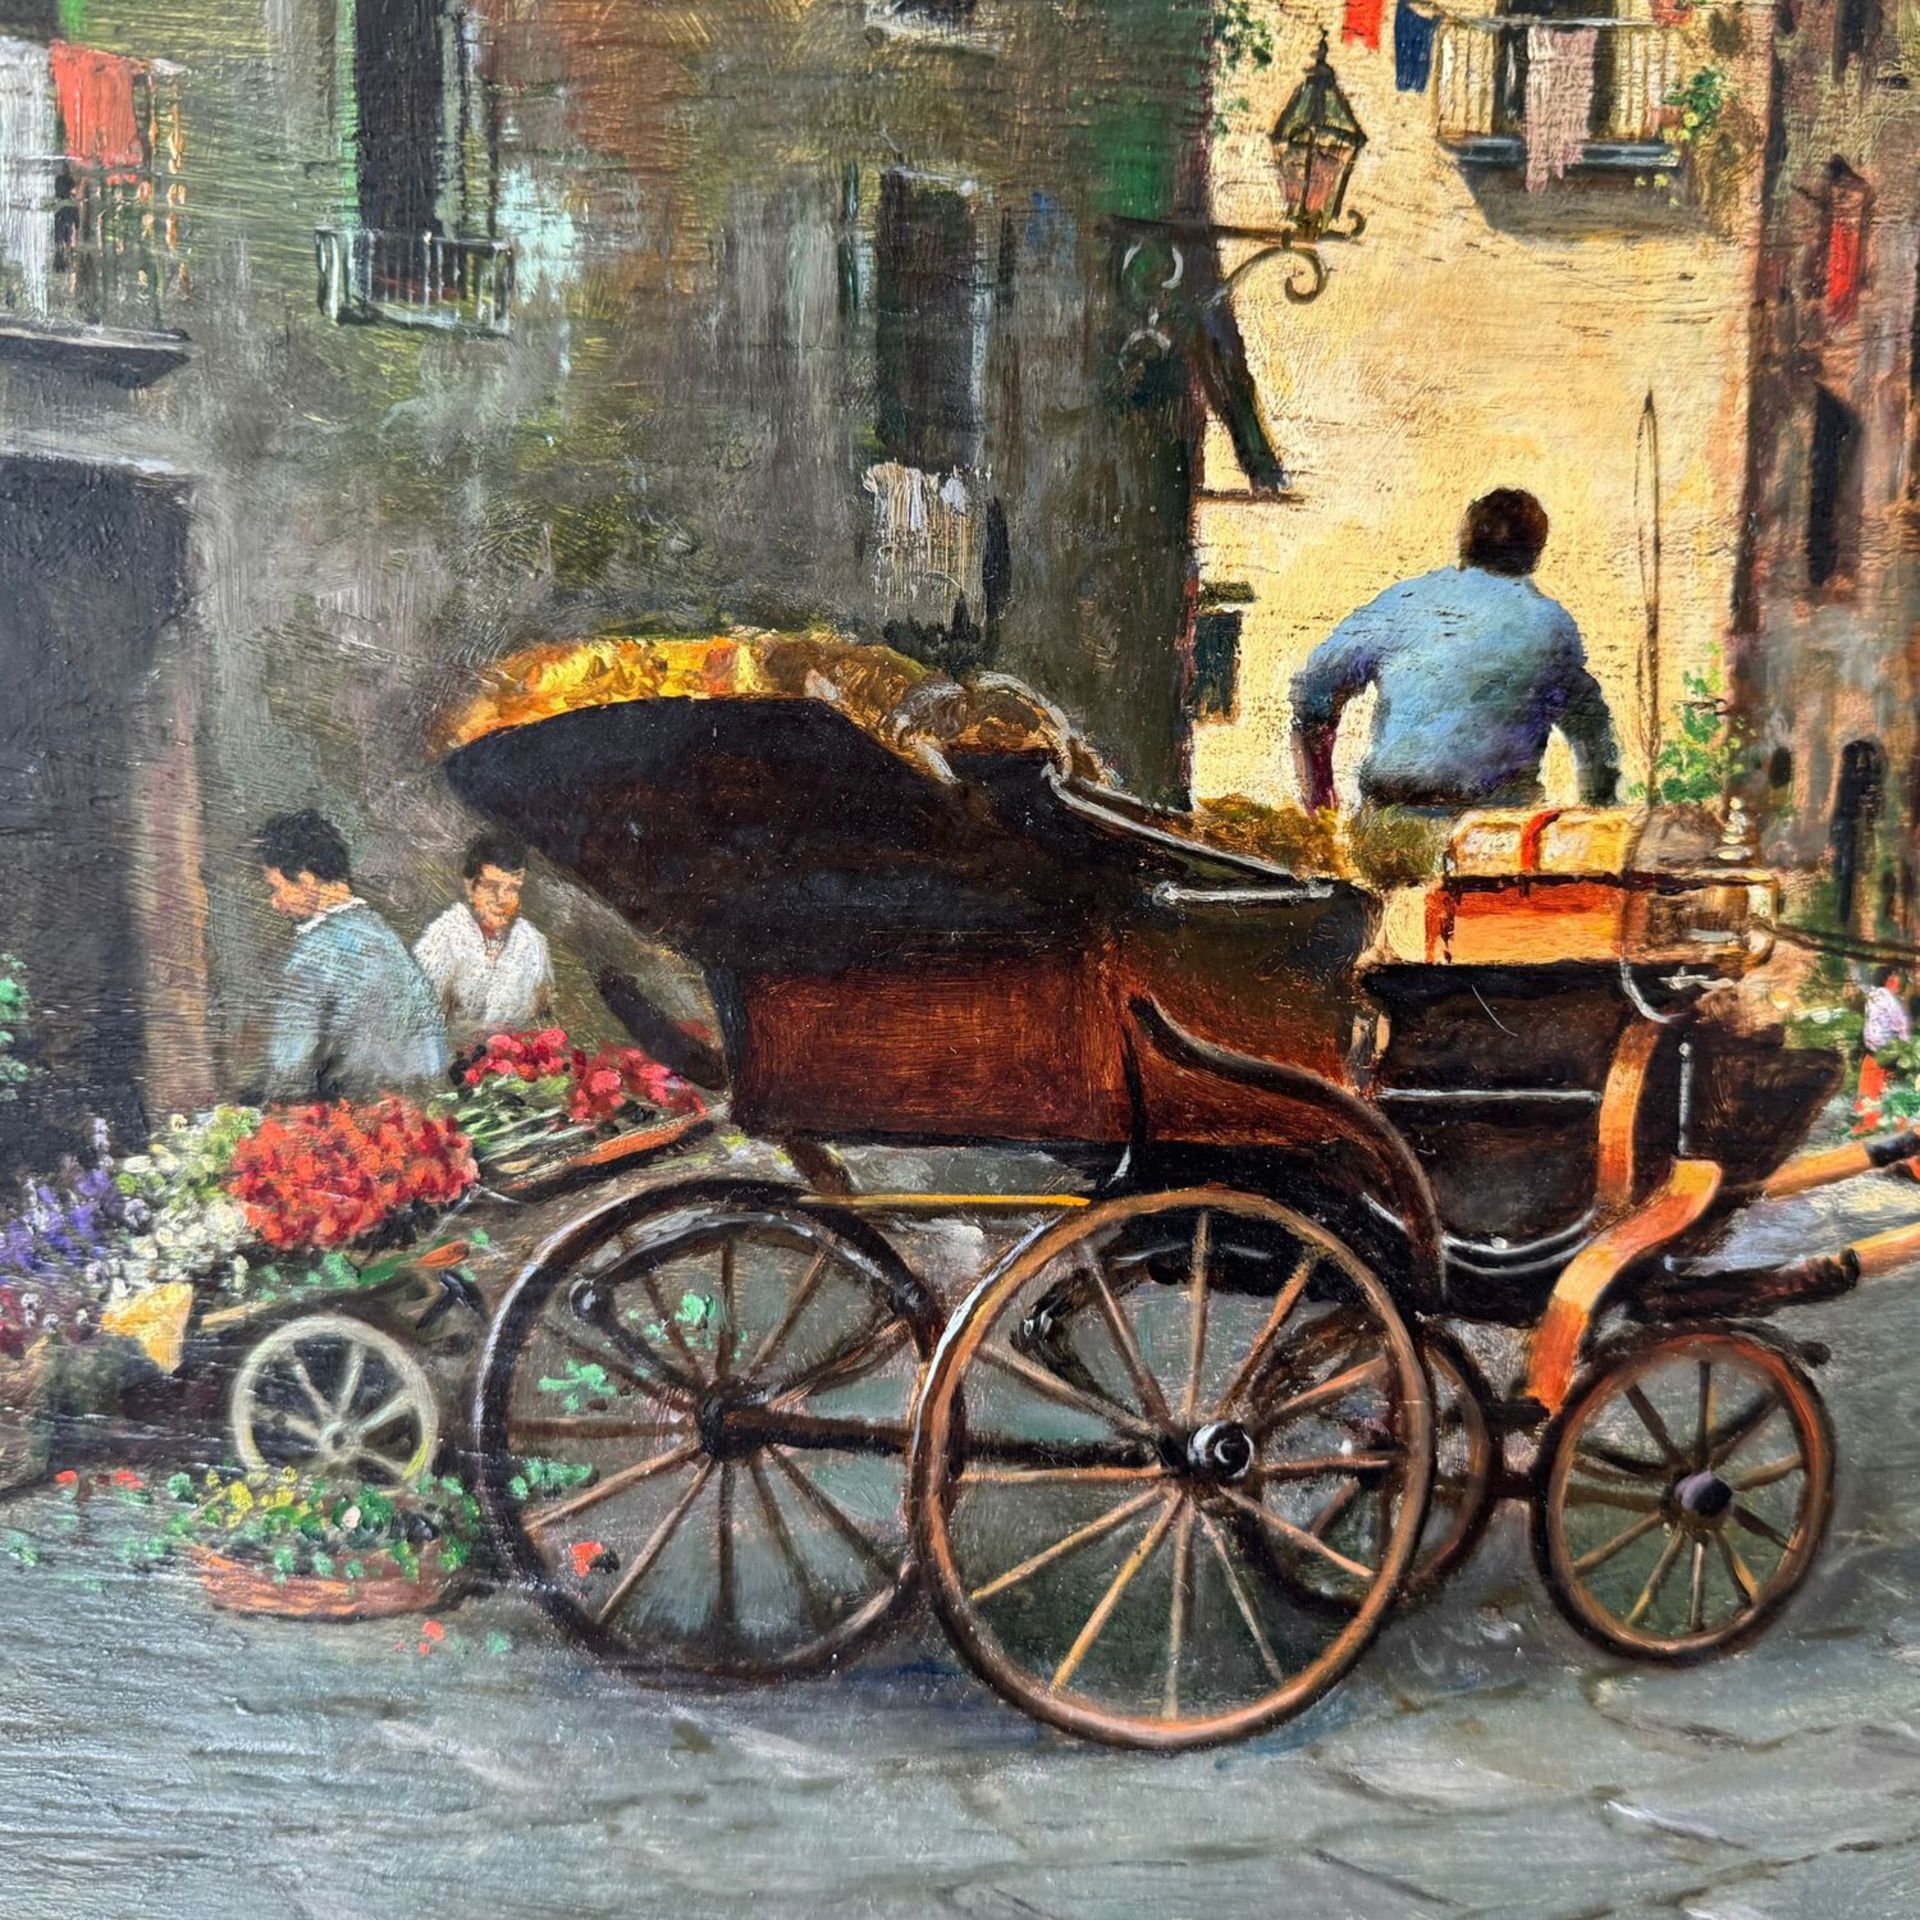 Neapolitan street with carriage and characters - E. Cerrone (1935 - 2010) - Image 2 of 7